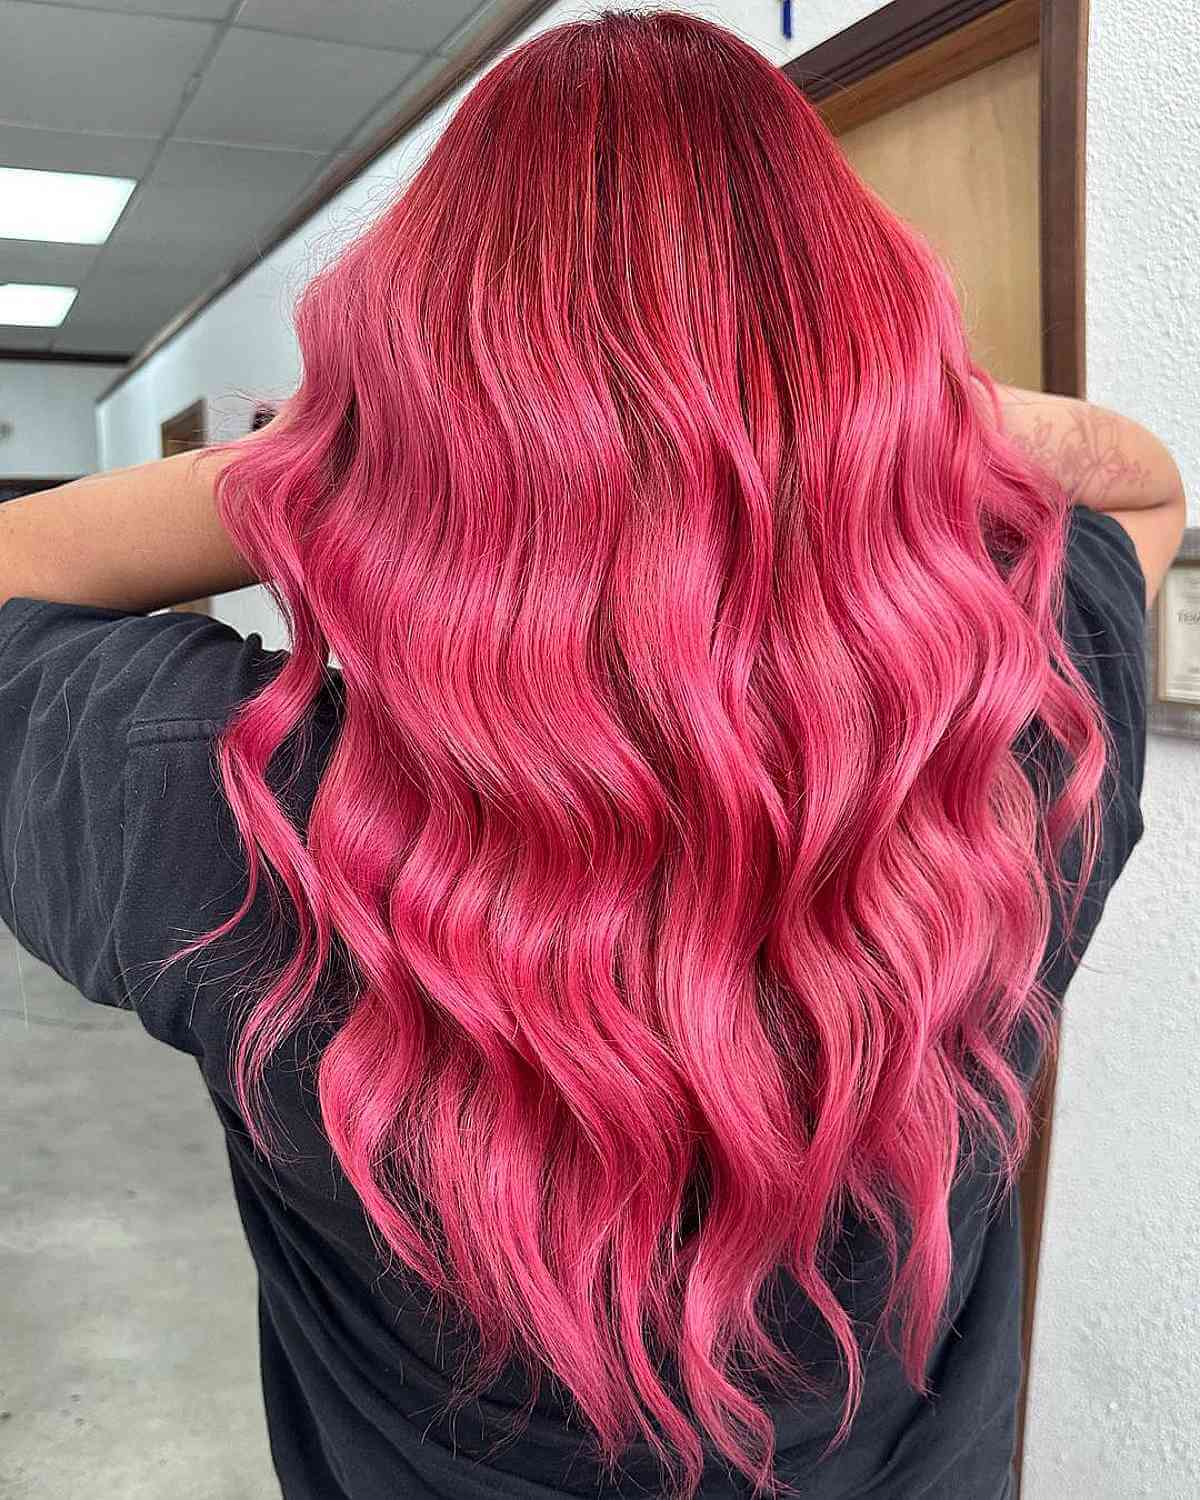 Mariner Værdiløs porter 77 Hottest Pink Hair Color Ideas - From Pastels to Neons